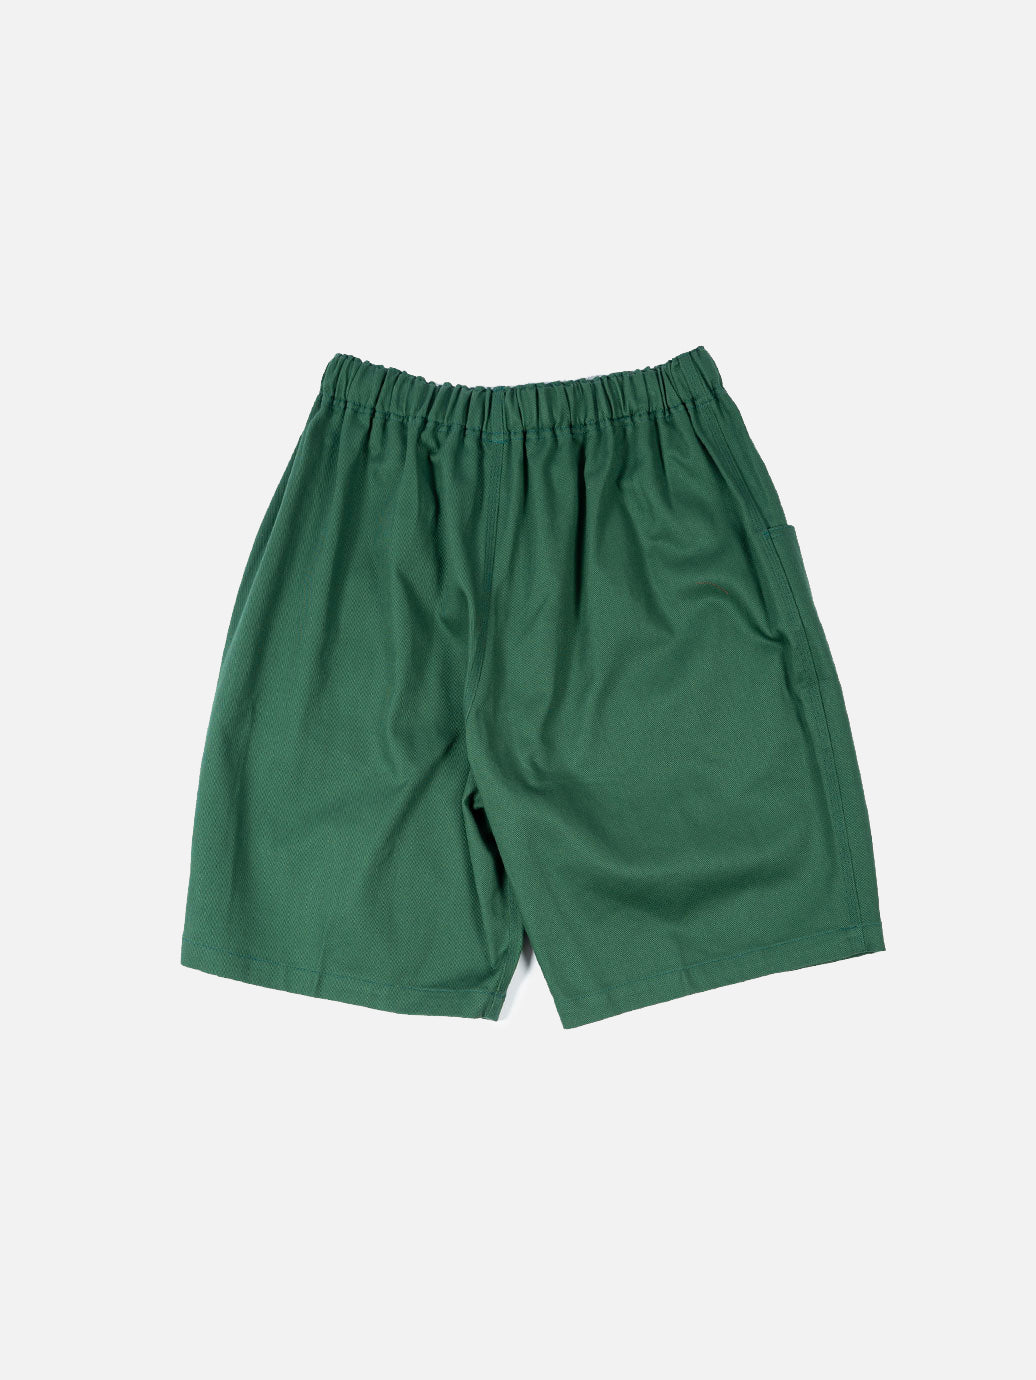 SOUTH2 WEST8 Belted C.S. Short